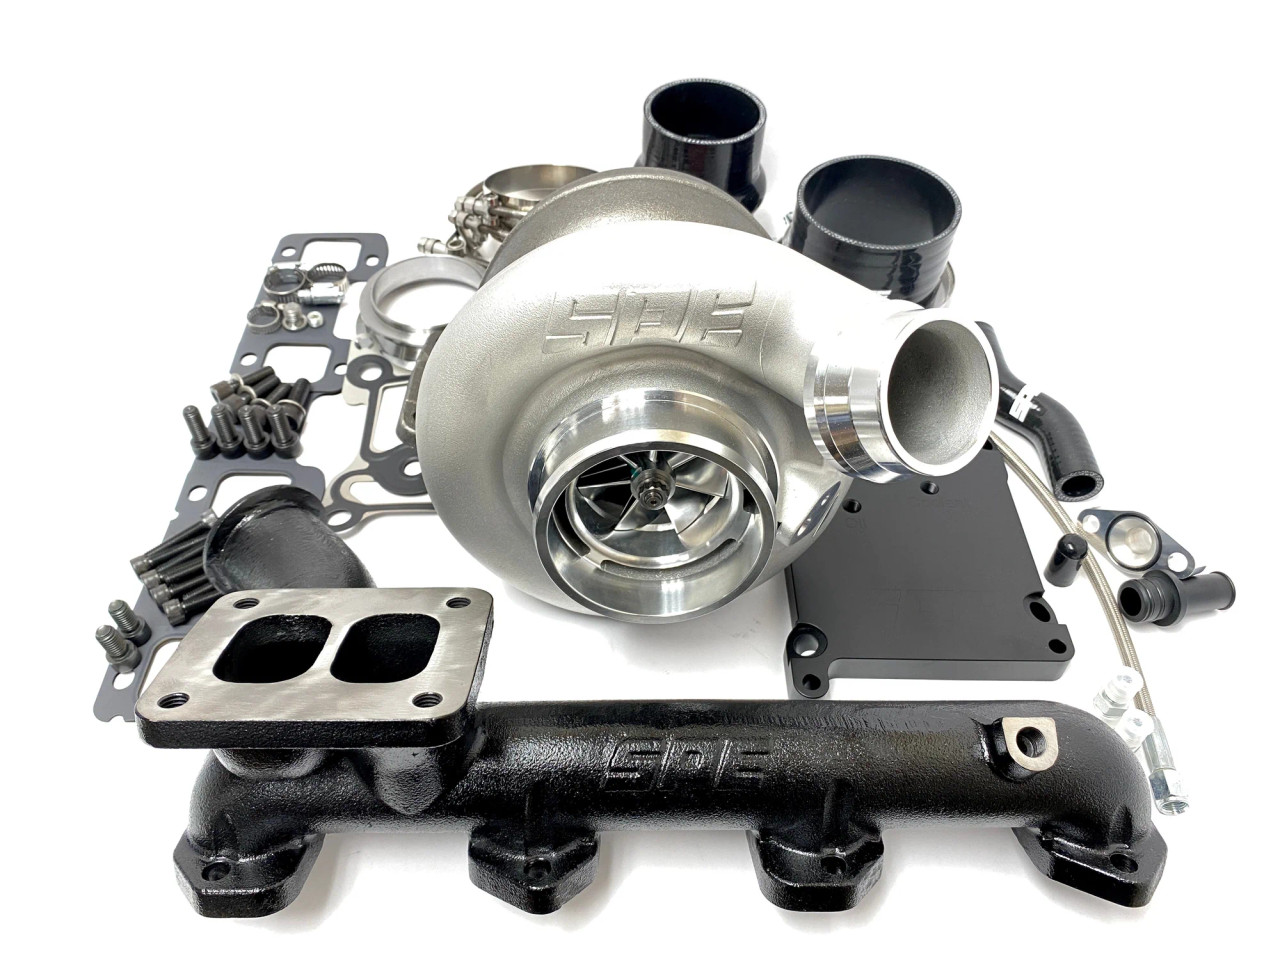 SPE EMPEROR TURBO SYSTEM FOR 2020+ Ford 6.7L Powerstroke - This View